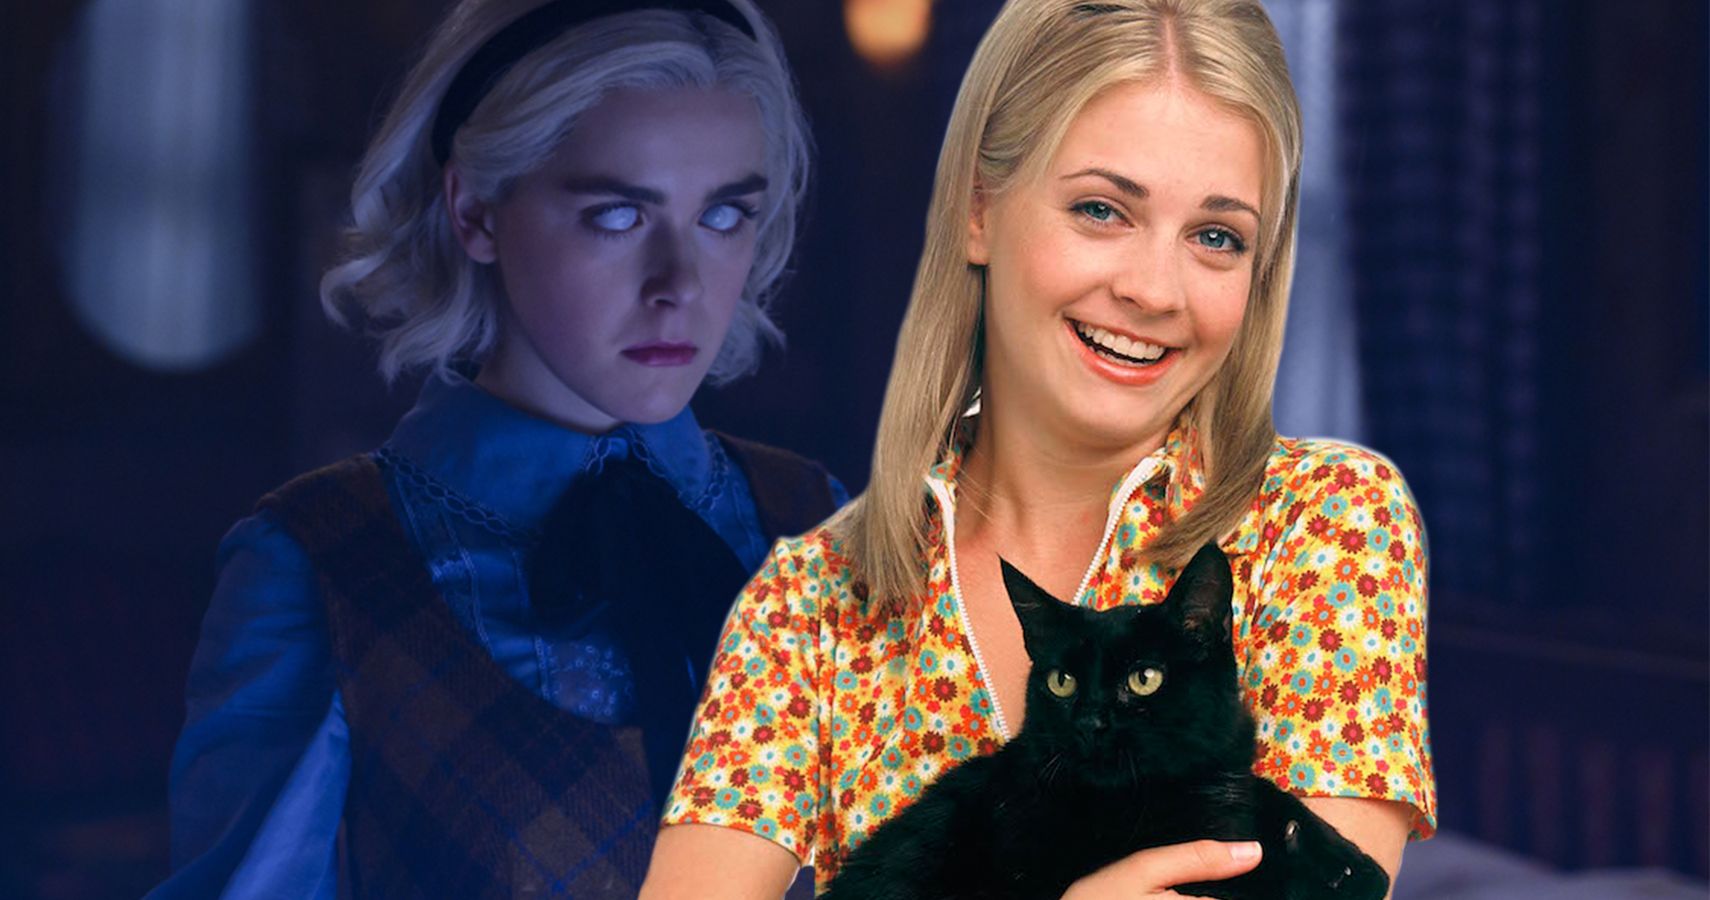 sabrina the teenage witch movie so different from show